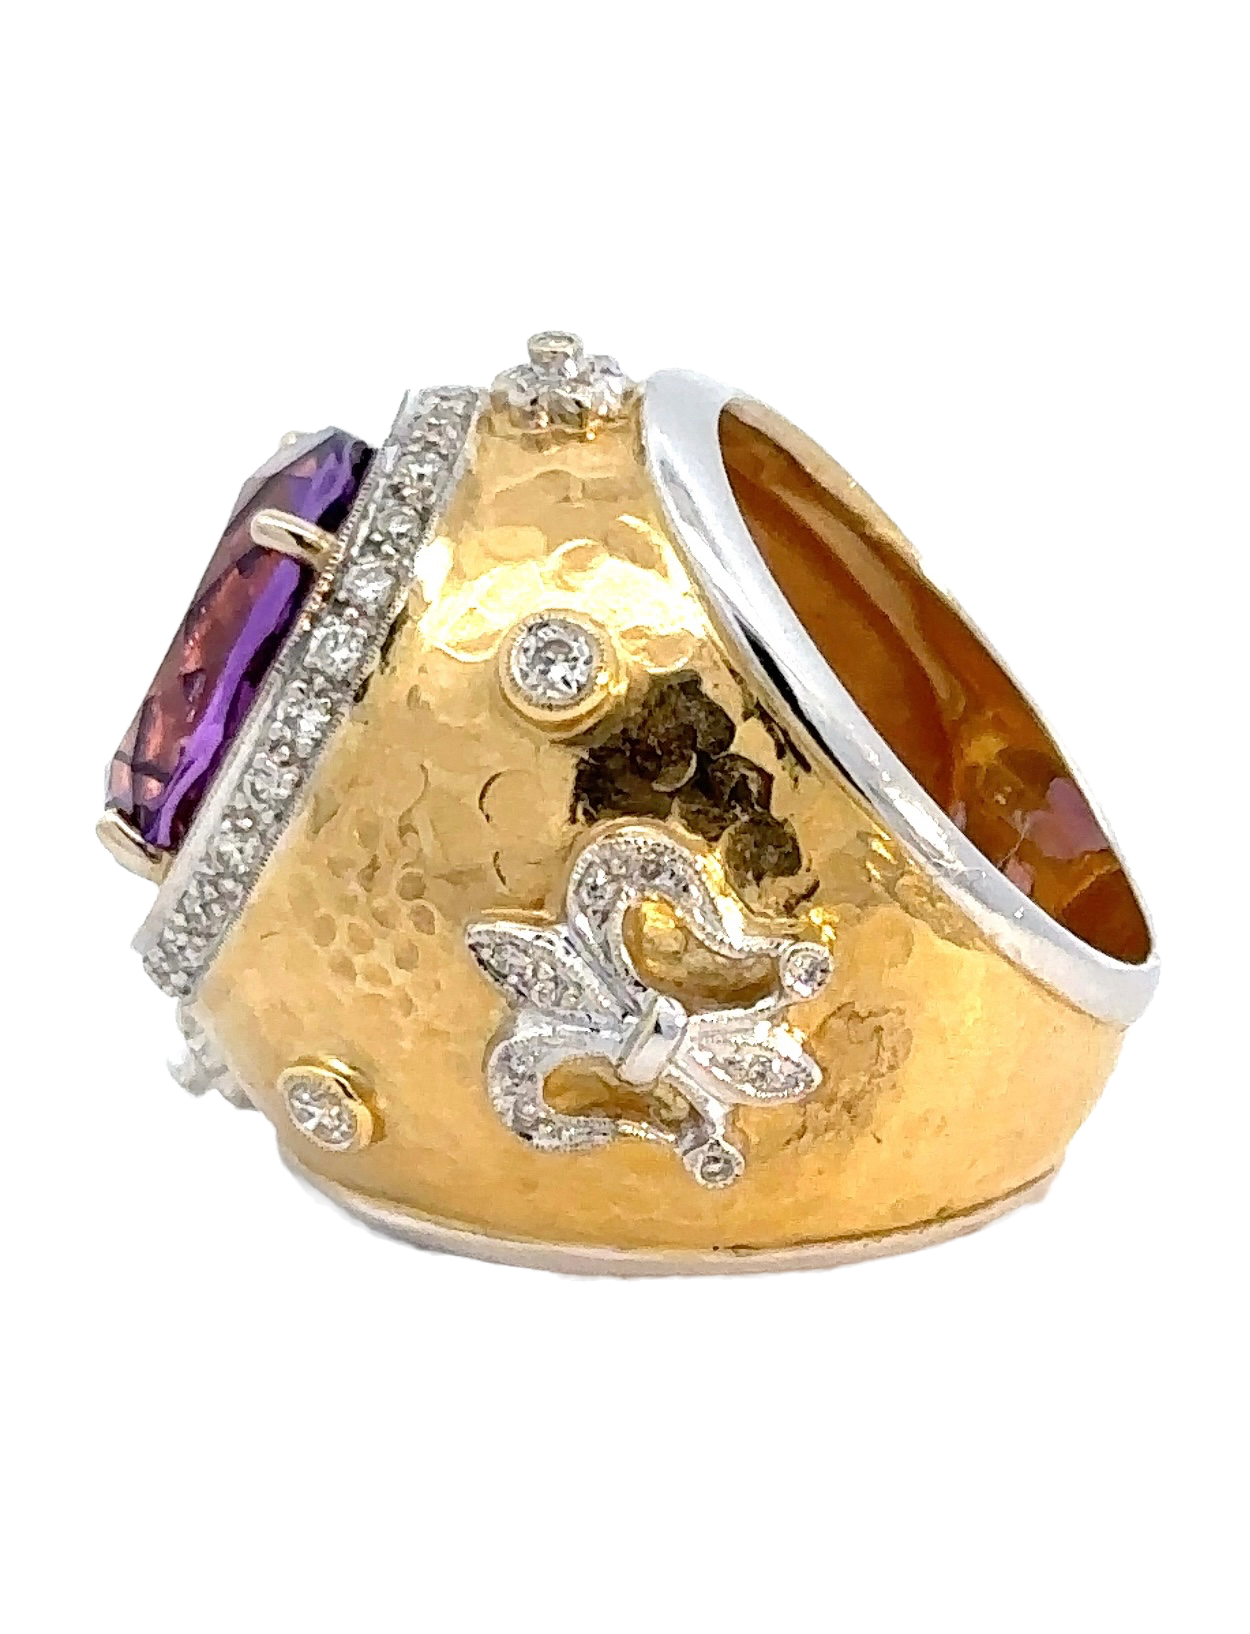 The side of the amethyst ring. Shows the 18K yellow gold and small diamonds. Some scratches shown.